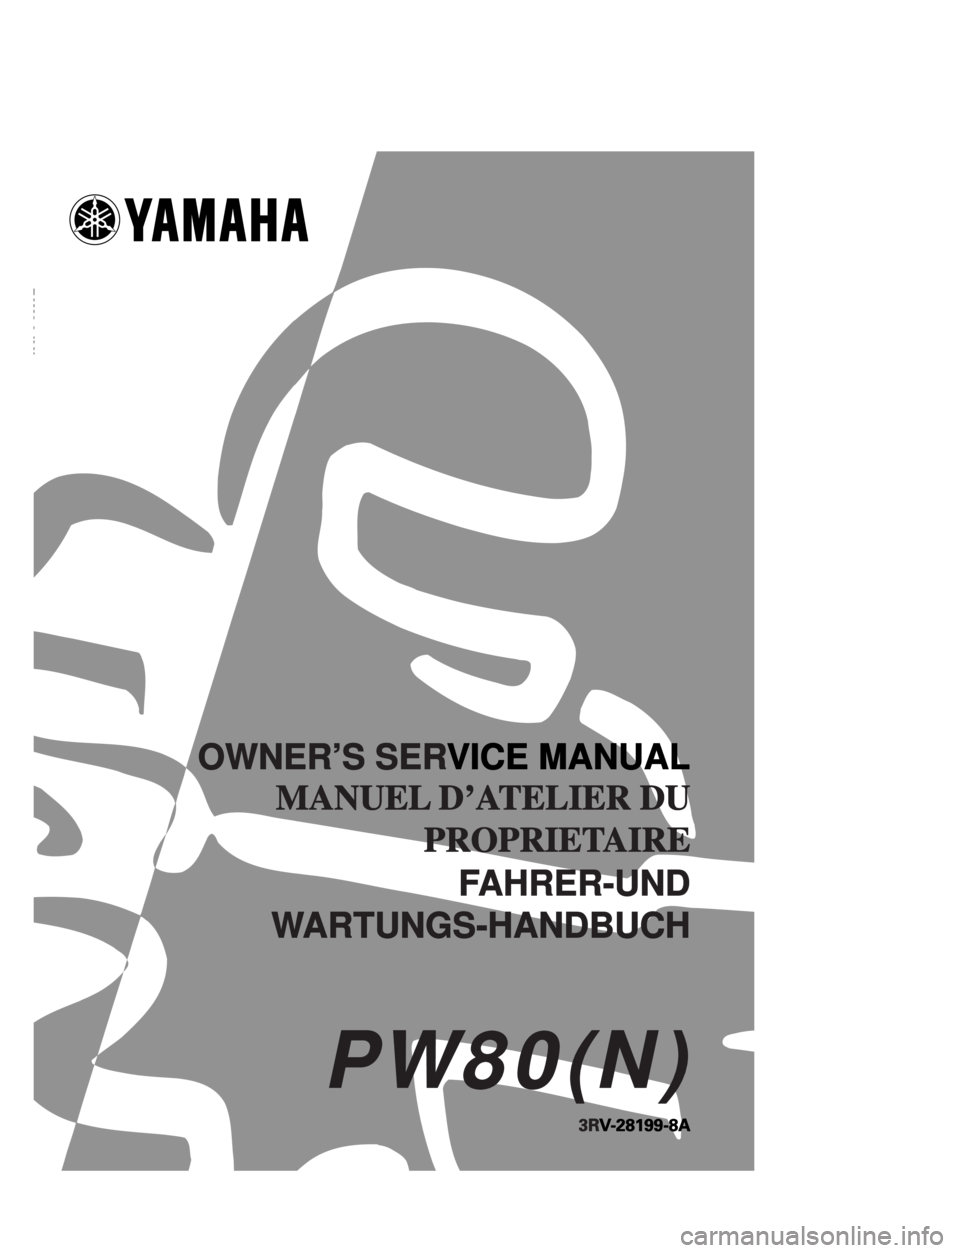 YAMAHA PW80 2001  Owners Manual OWNERÕS SERVICE MANUAL
MANUEL DÕATELIER DU 
PROPRIETAIRE
FAHRER-UND 
WARTUNGS-HANDBUCH
PPW80(N)
3RV-28199-8A
PPW80(N)
PW80_80Cover  00.10.12 10:37 PM  Page 1 (2,1)    (Magenta plate) 